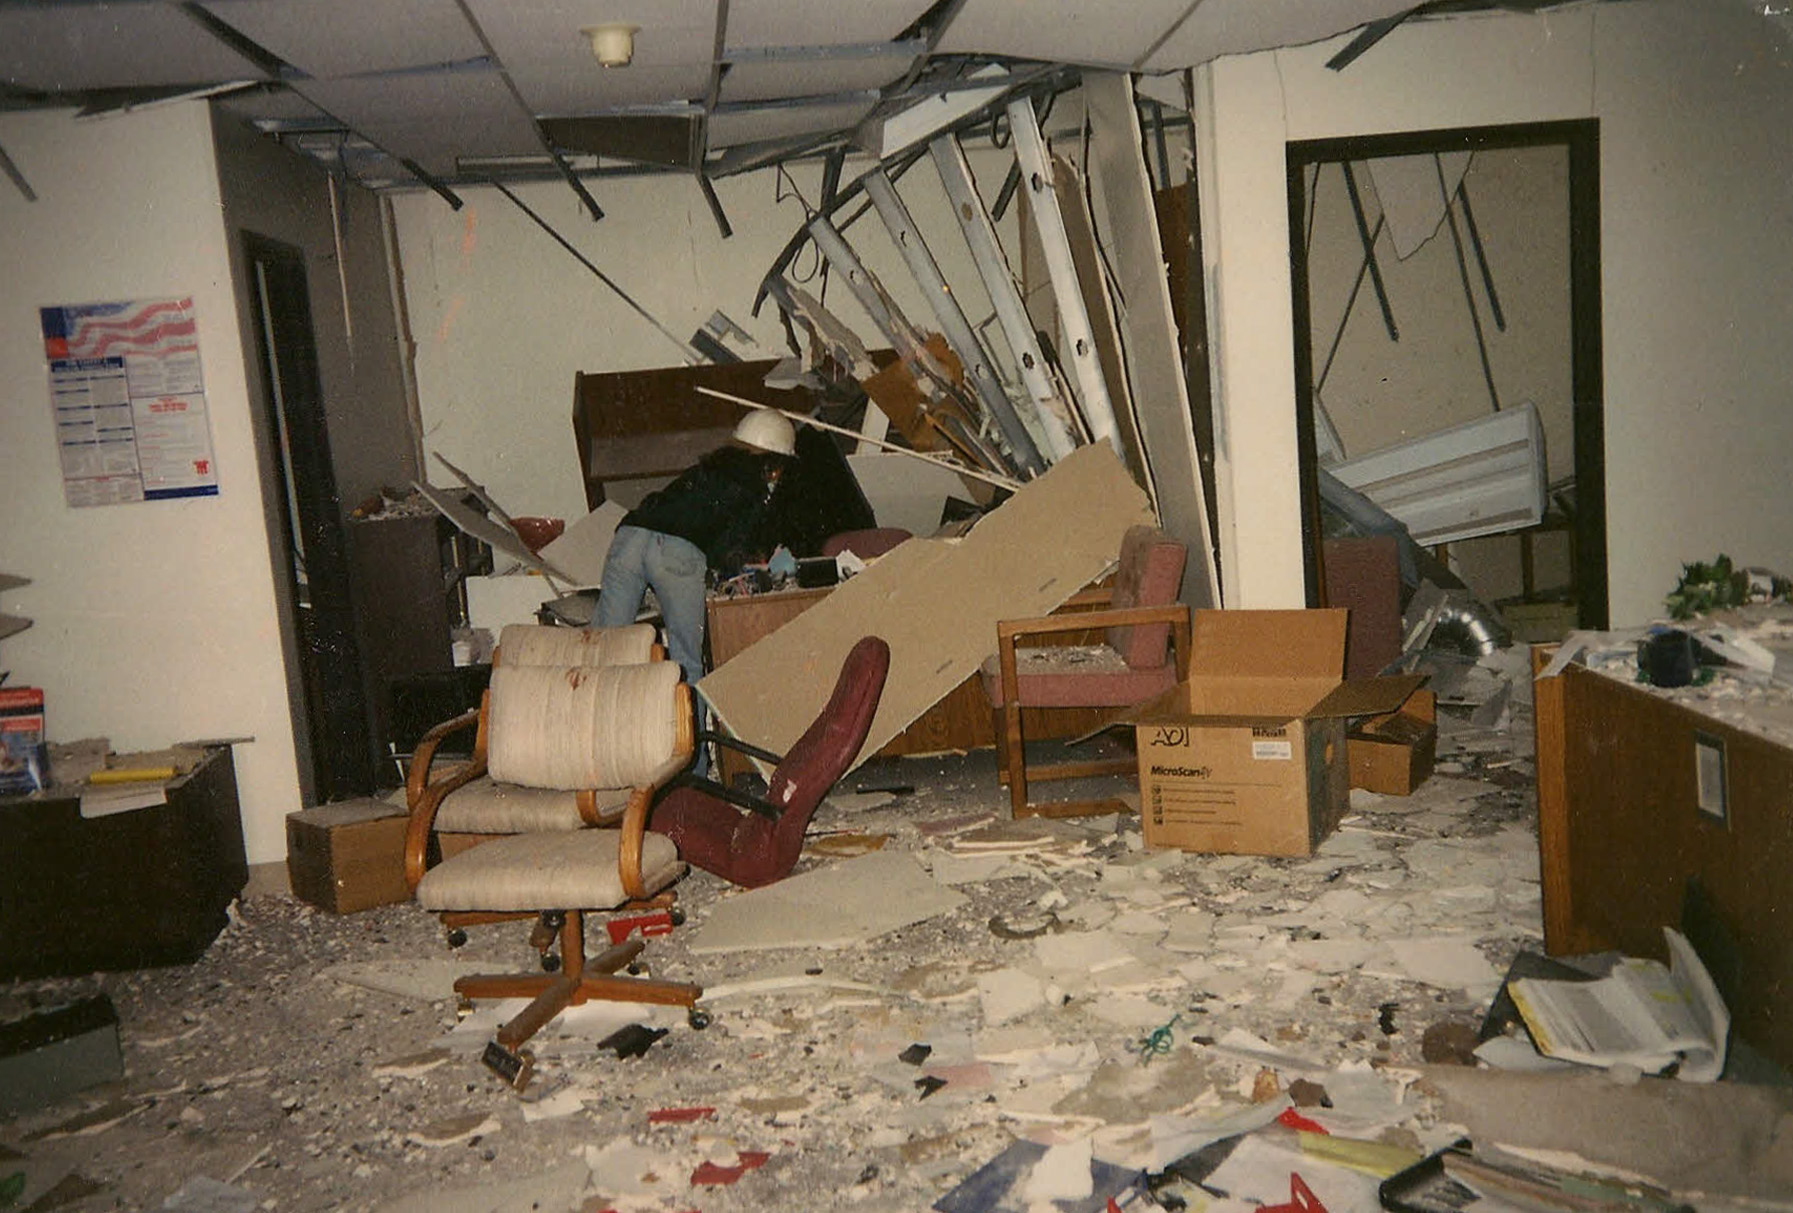 More damaged done to the Journal Record Building by the Oklahoma City bombing.